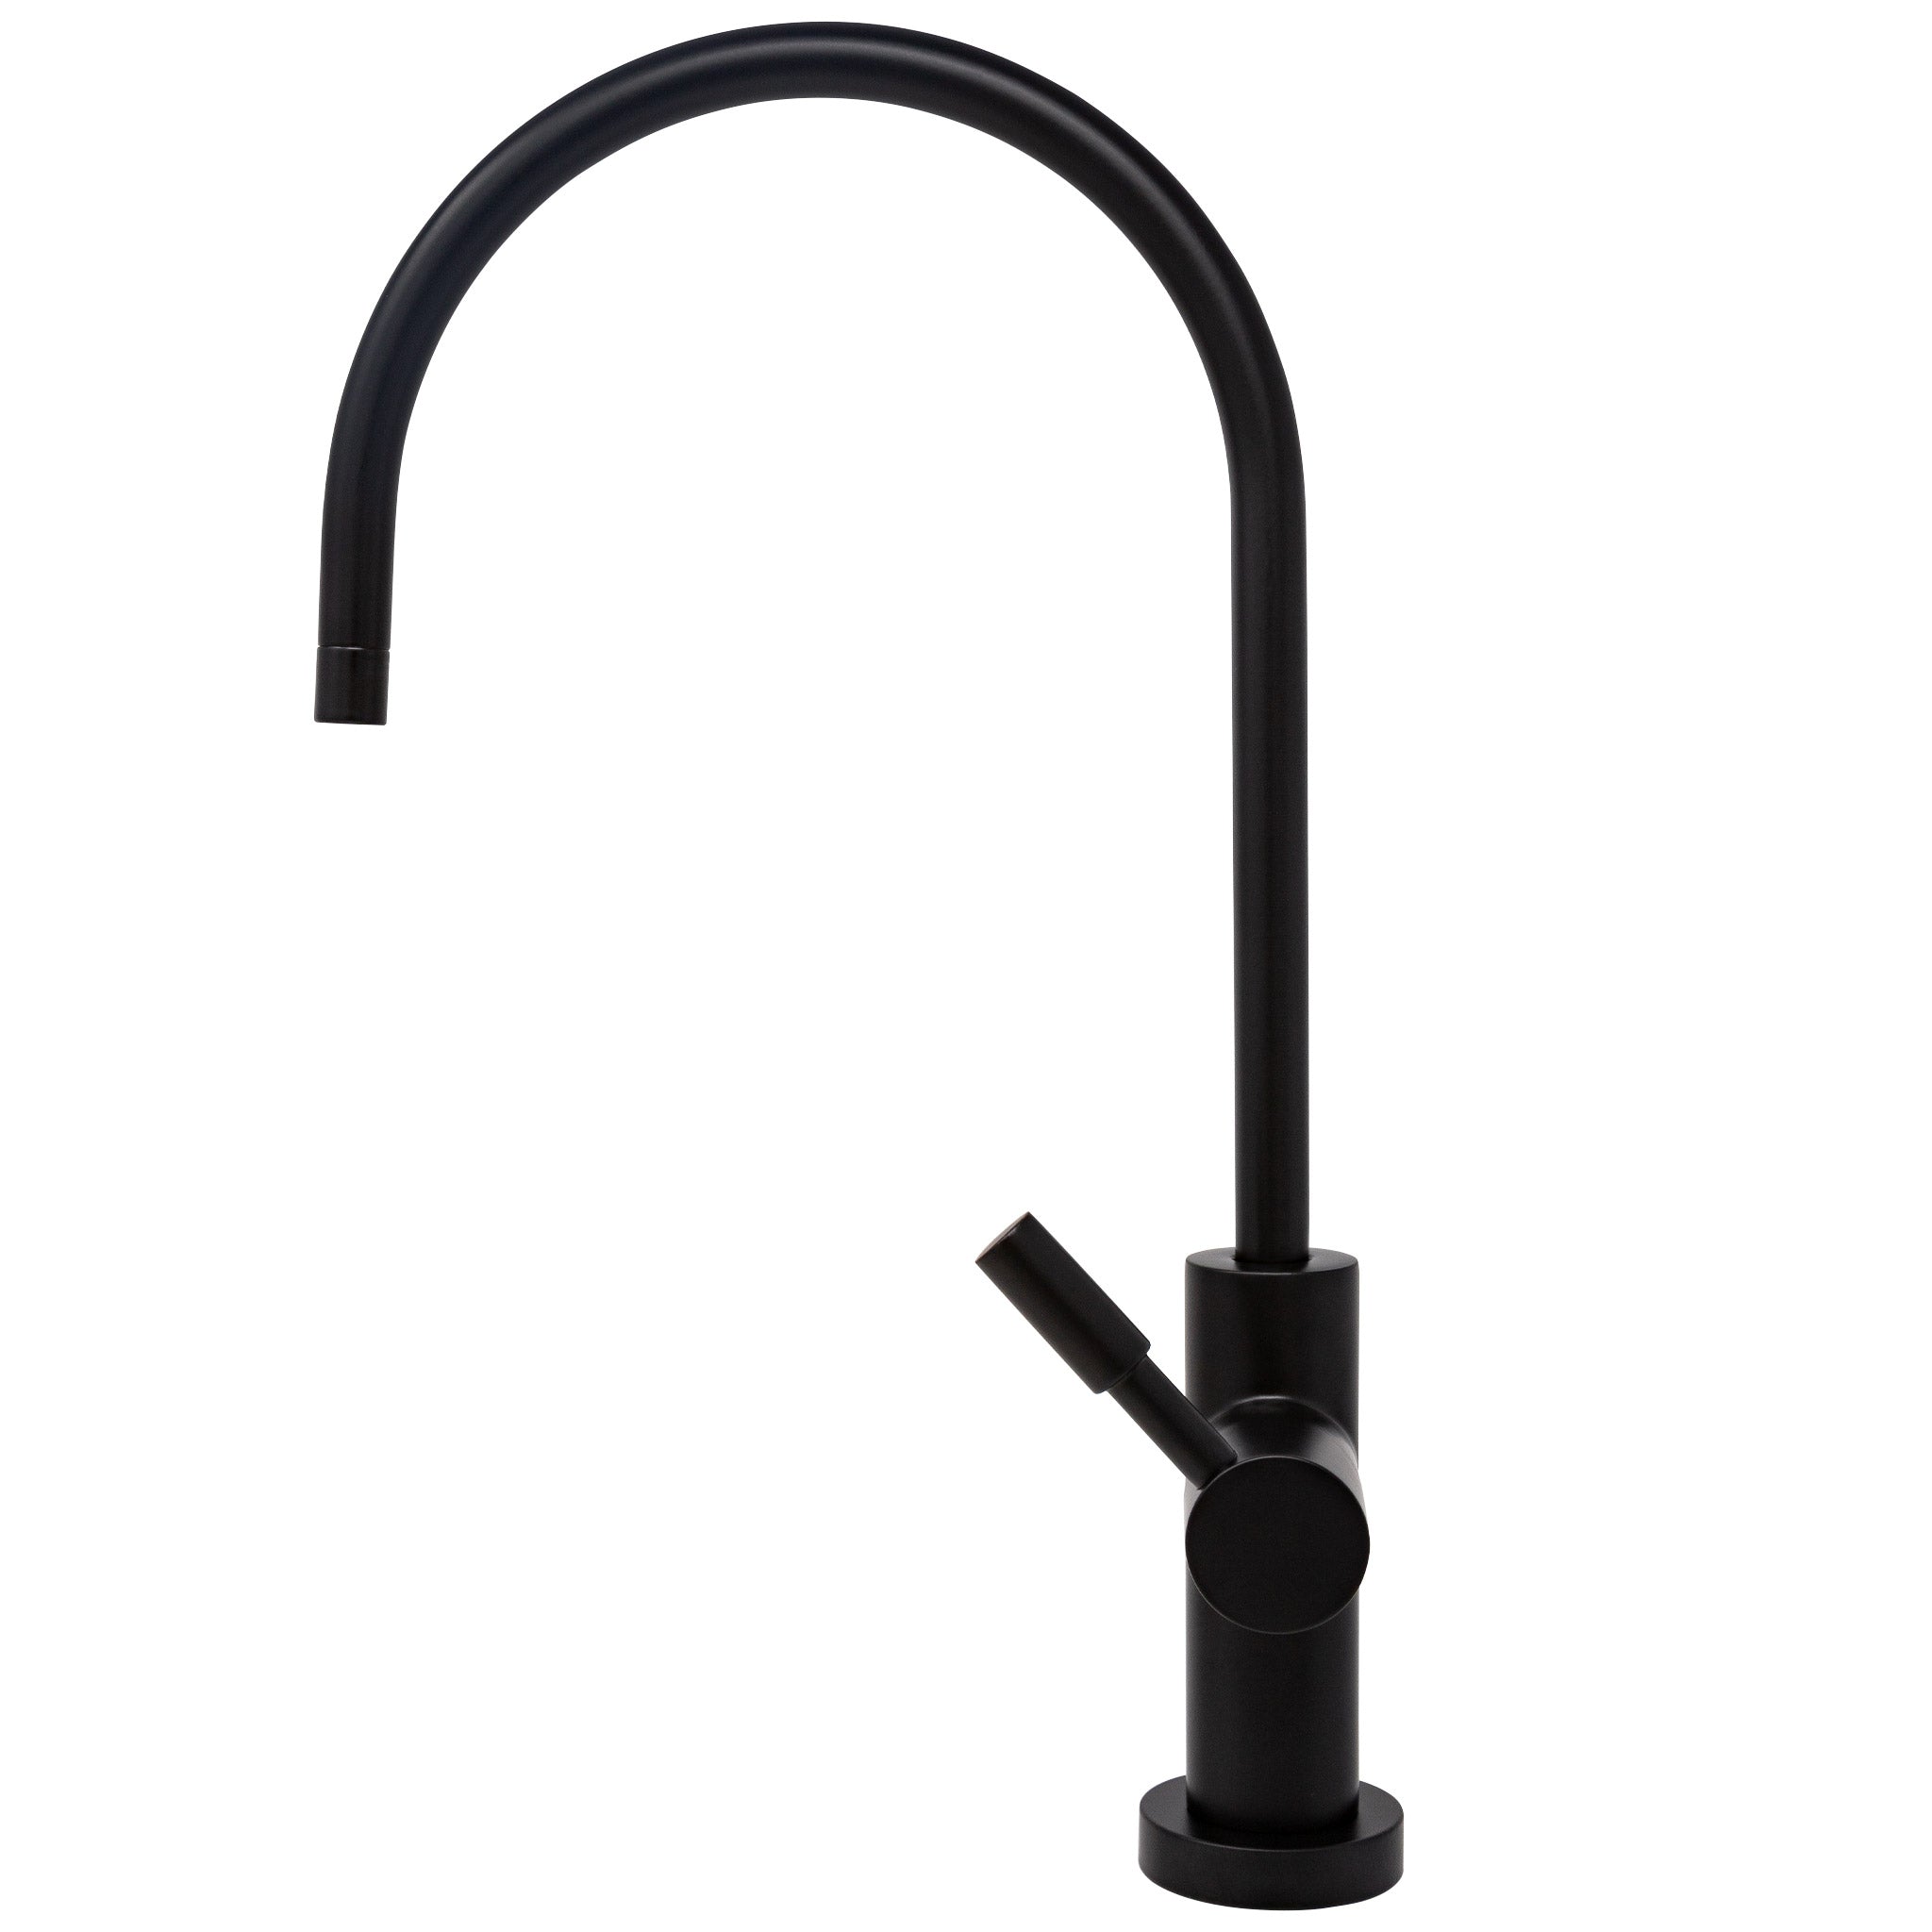 Water Filtration Faucet Matte Black Large Euro Style Reverse Osmosis Non Air Gap. Certified by NSF.